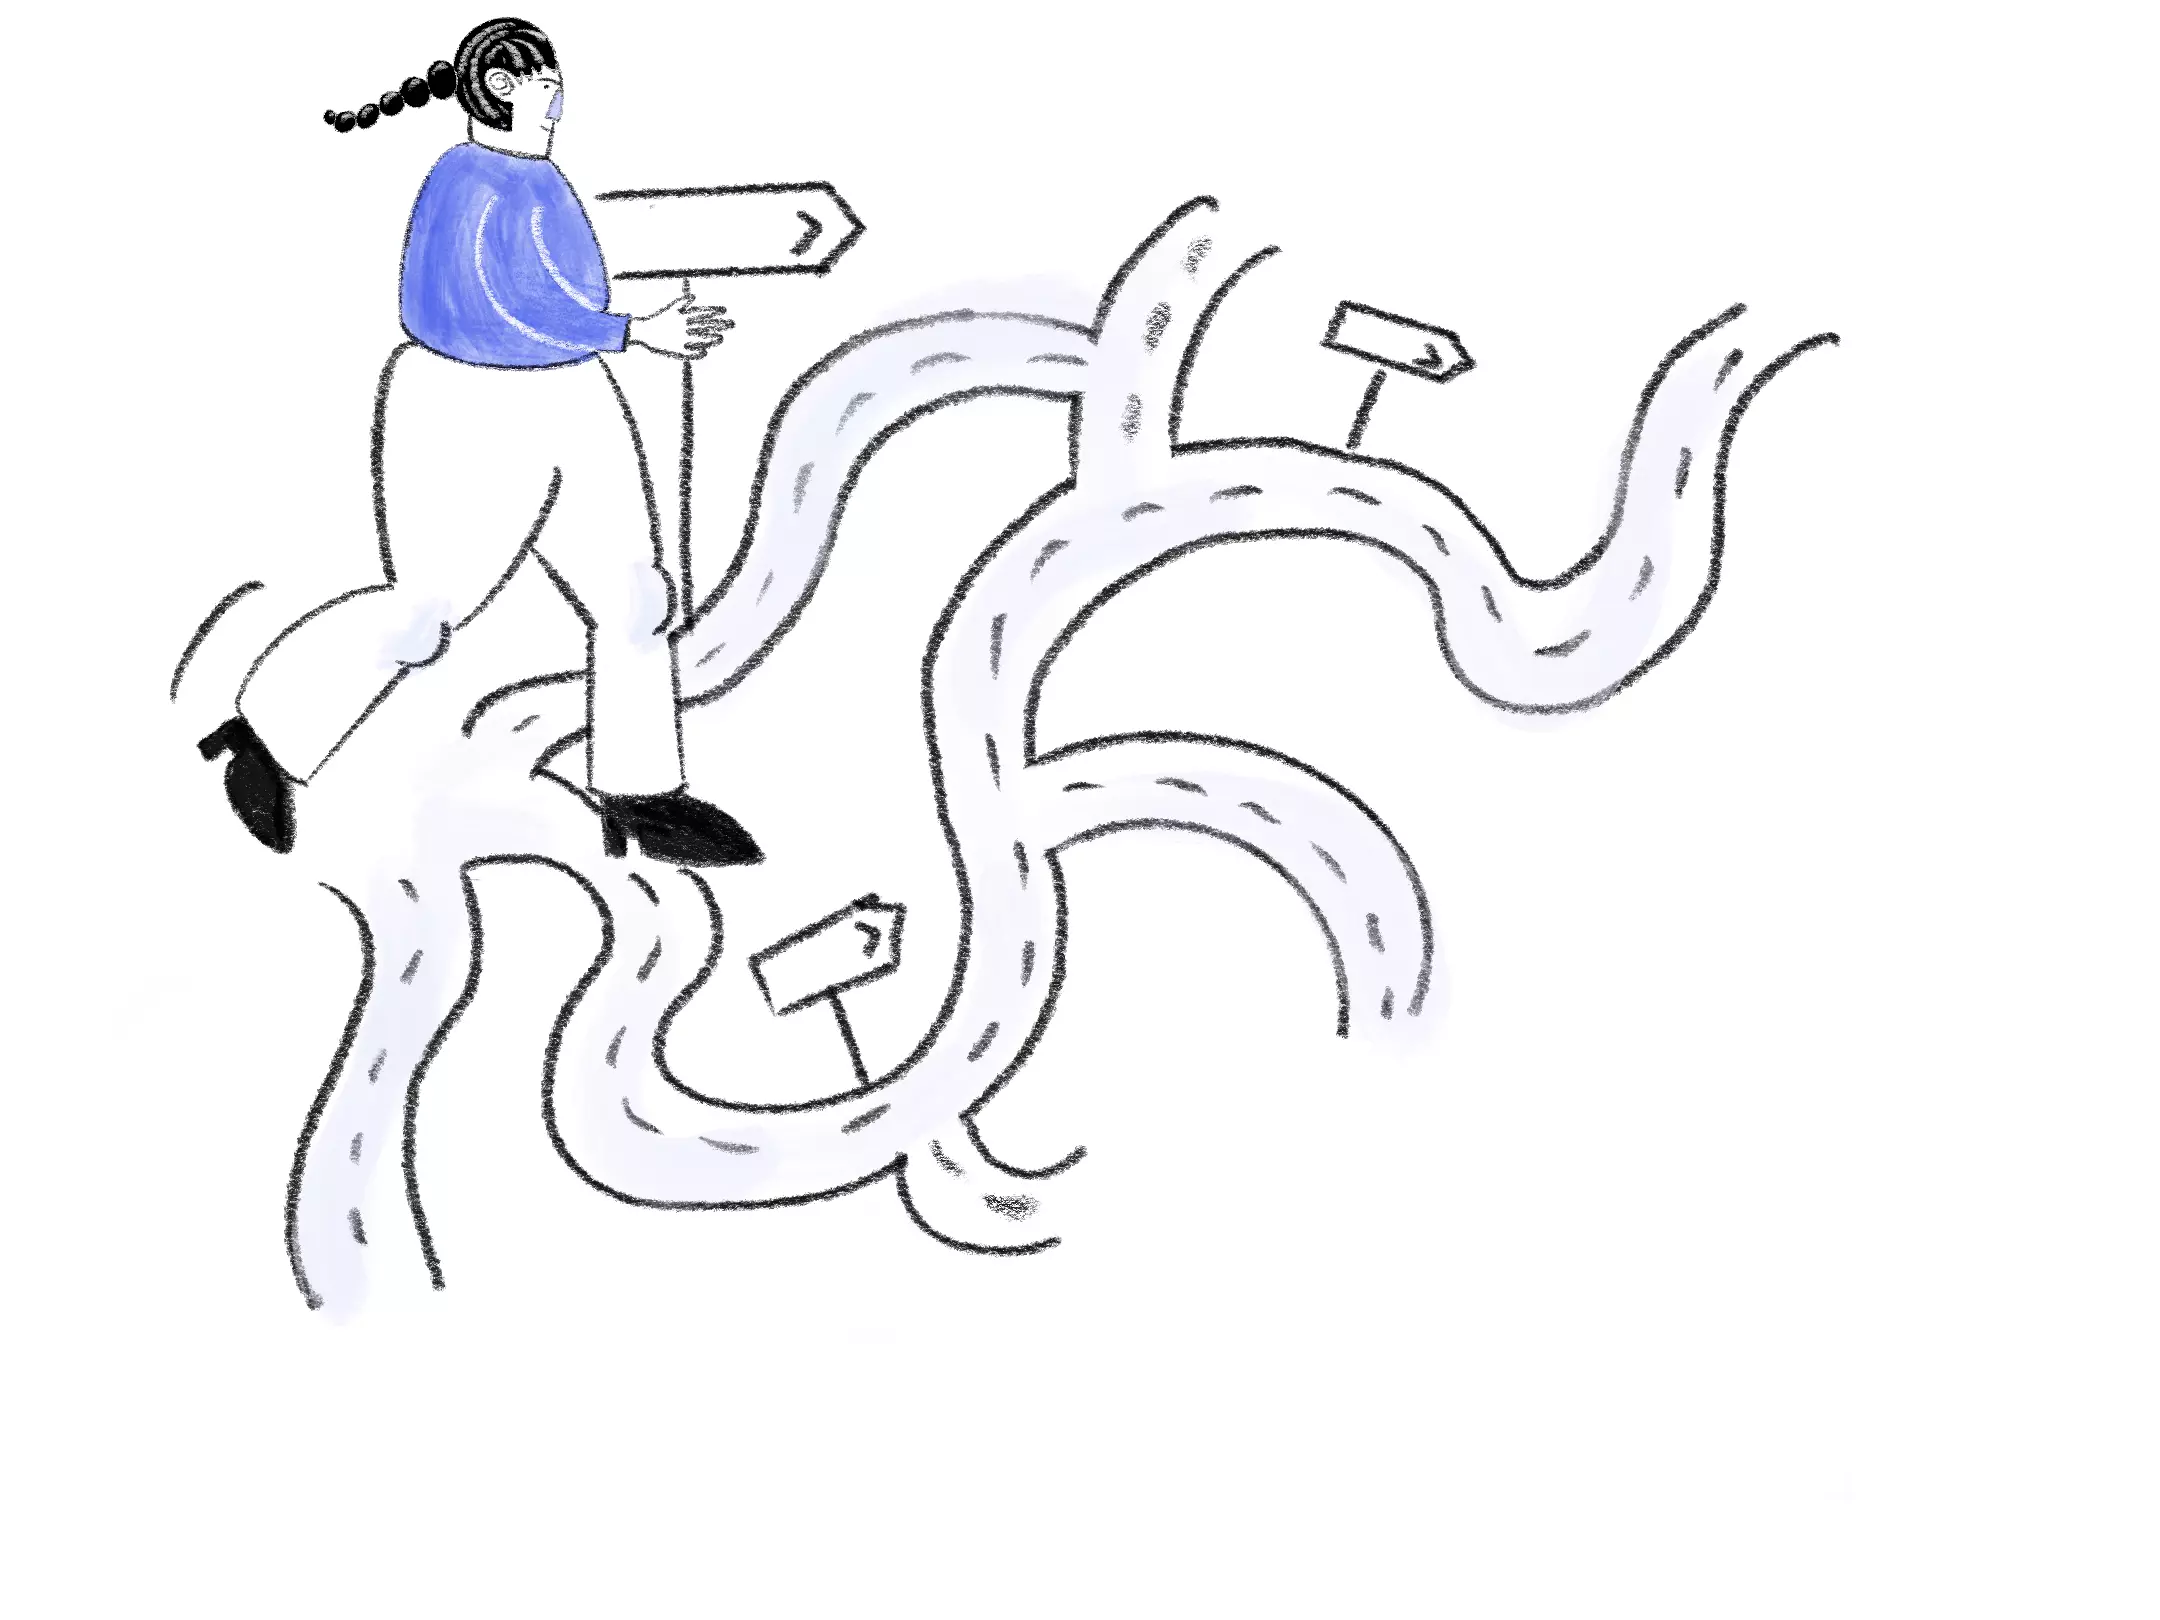 Illustration of a person finding their way across different paths